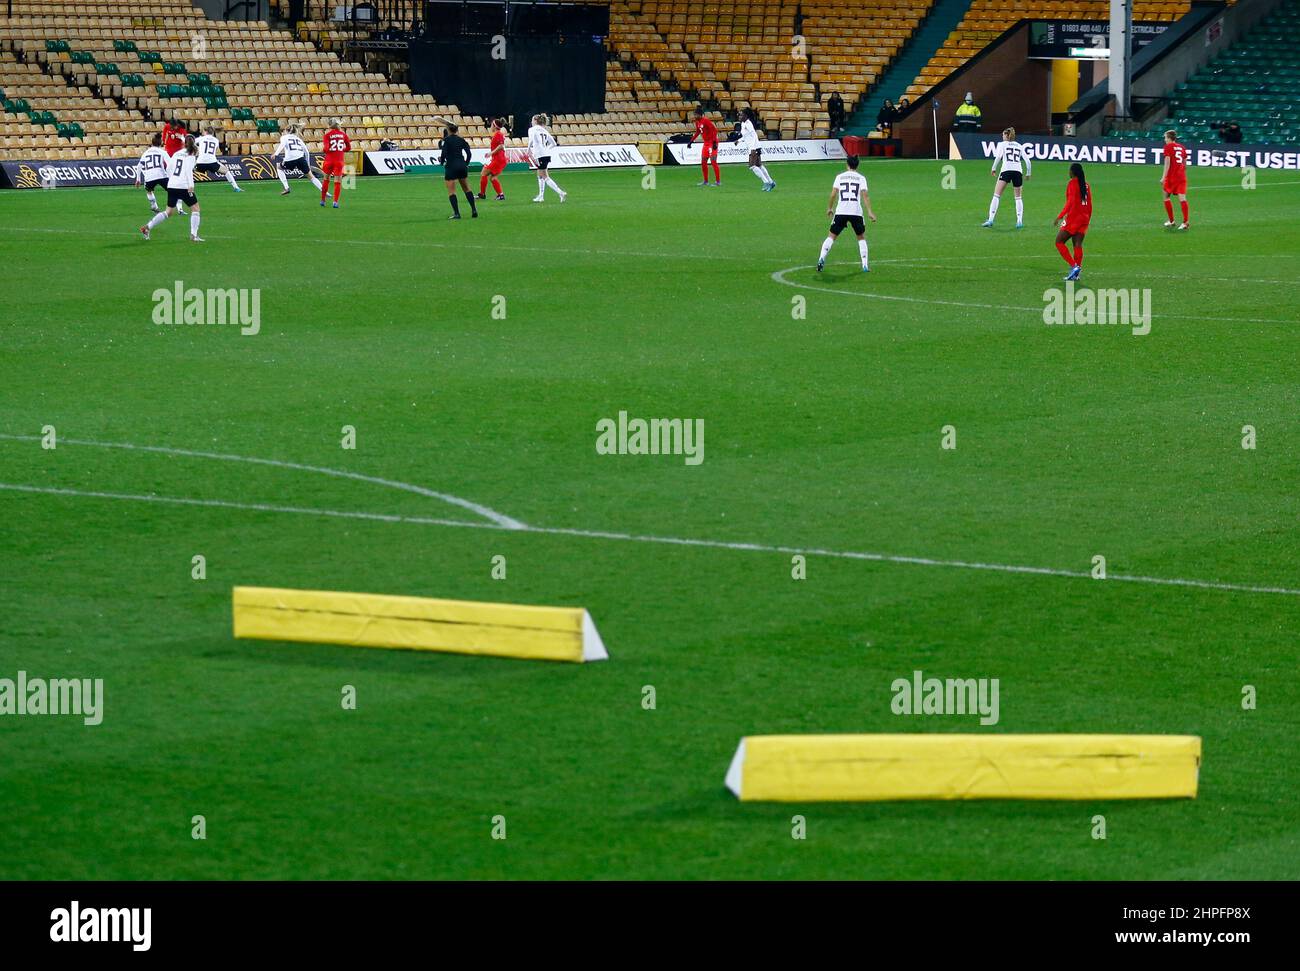 NORWICH, United Kingdom, FEBRUARY 20:Boards go onto pitch due to high winds during Arnold Clark Cup between Germany and Canada  at Carrow Road, Norwic Stock Photo